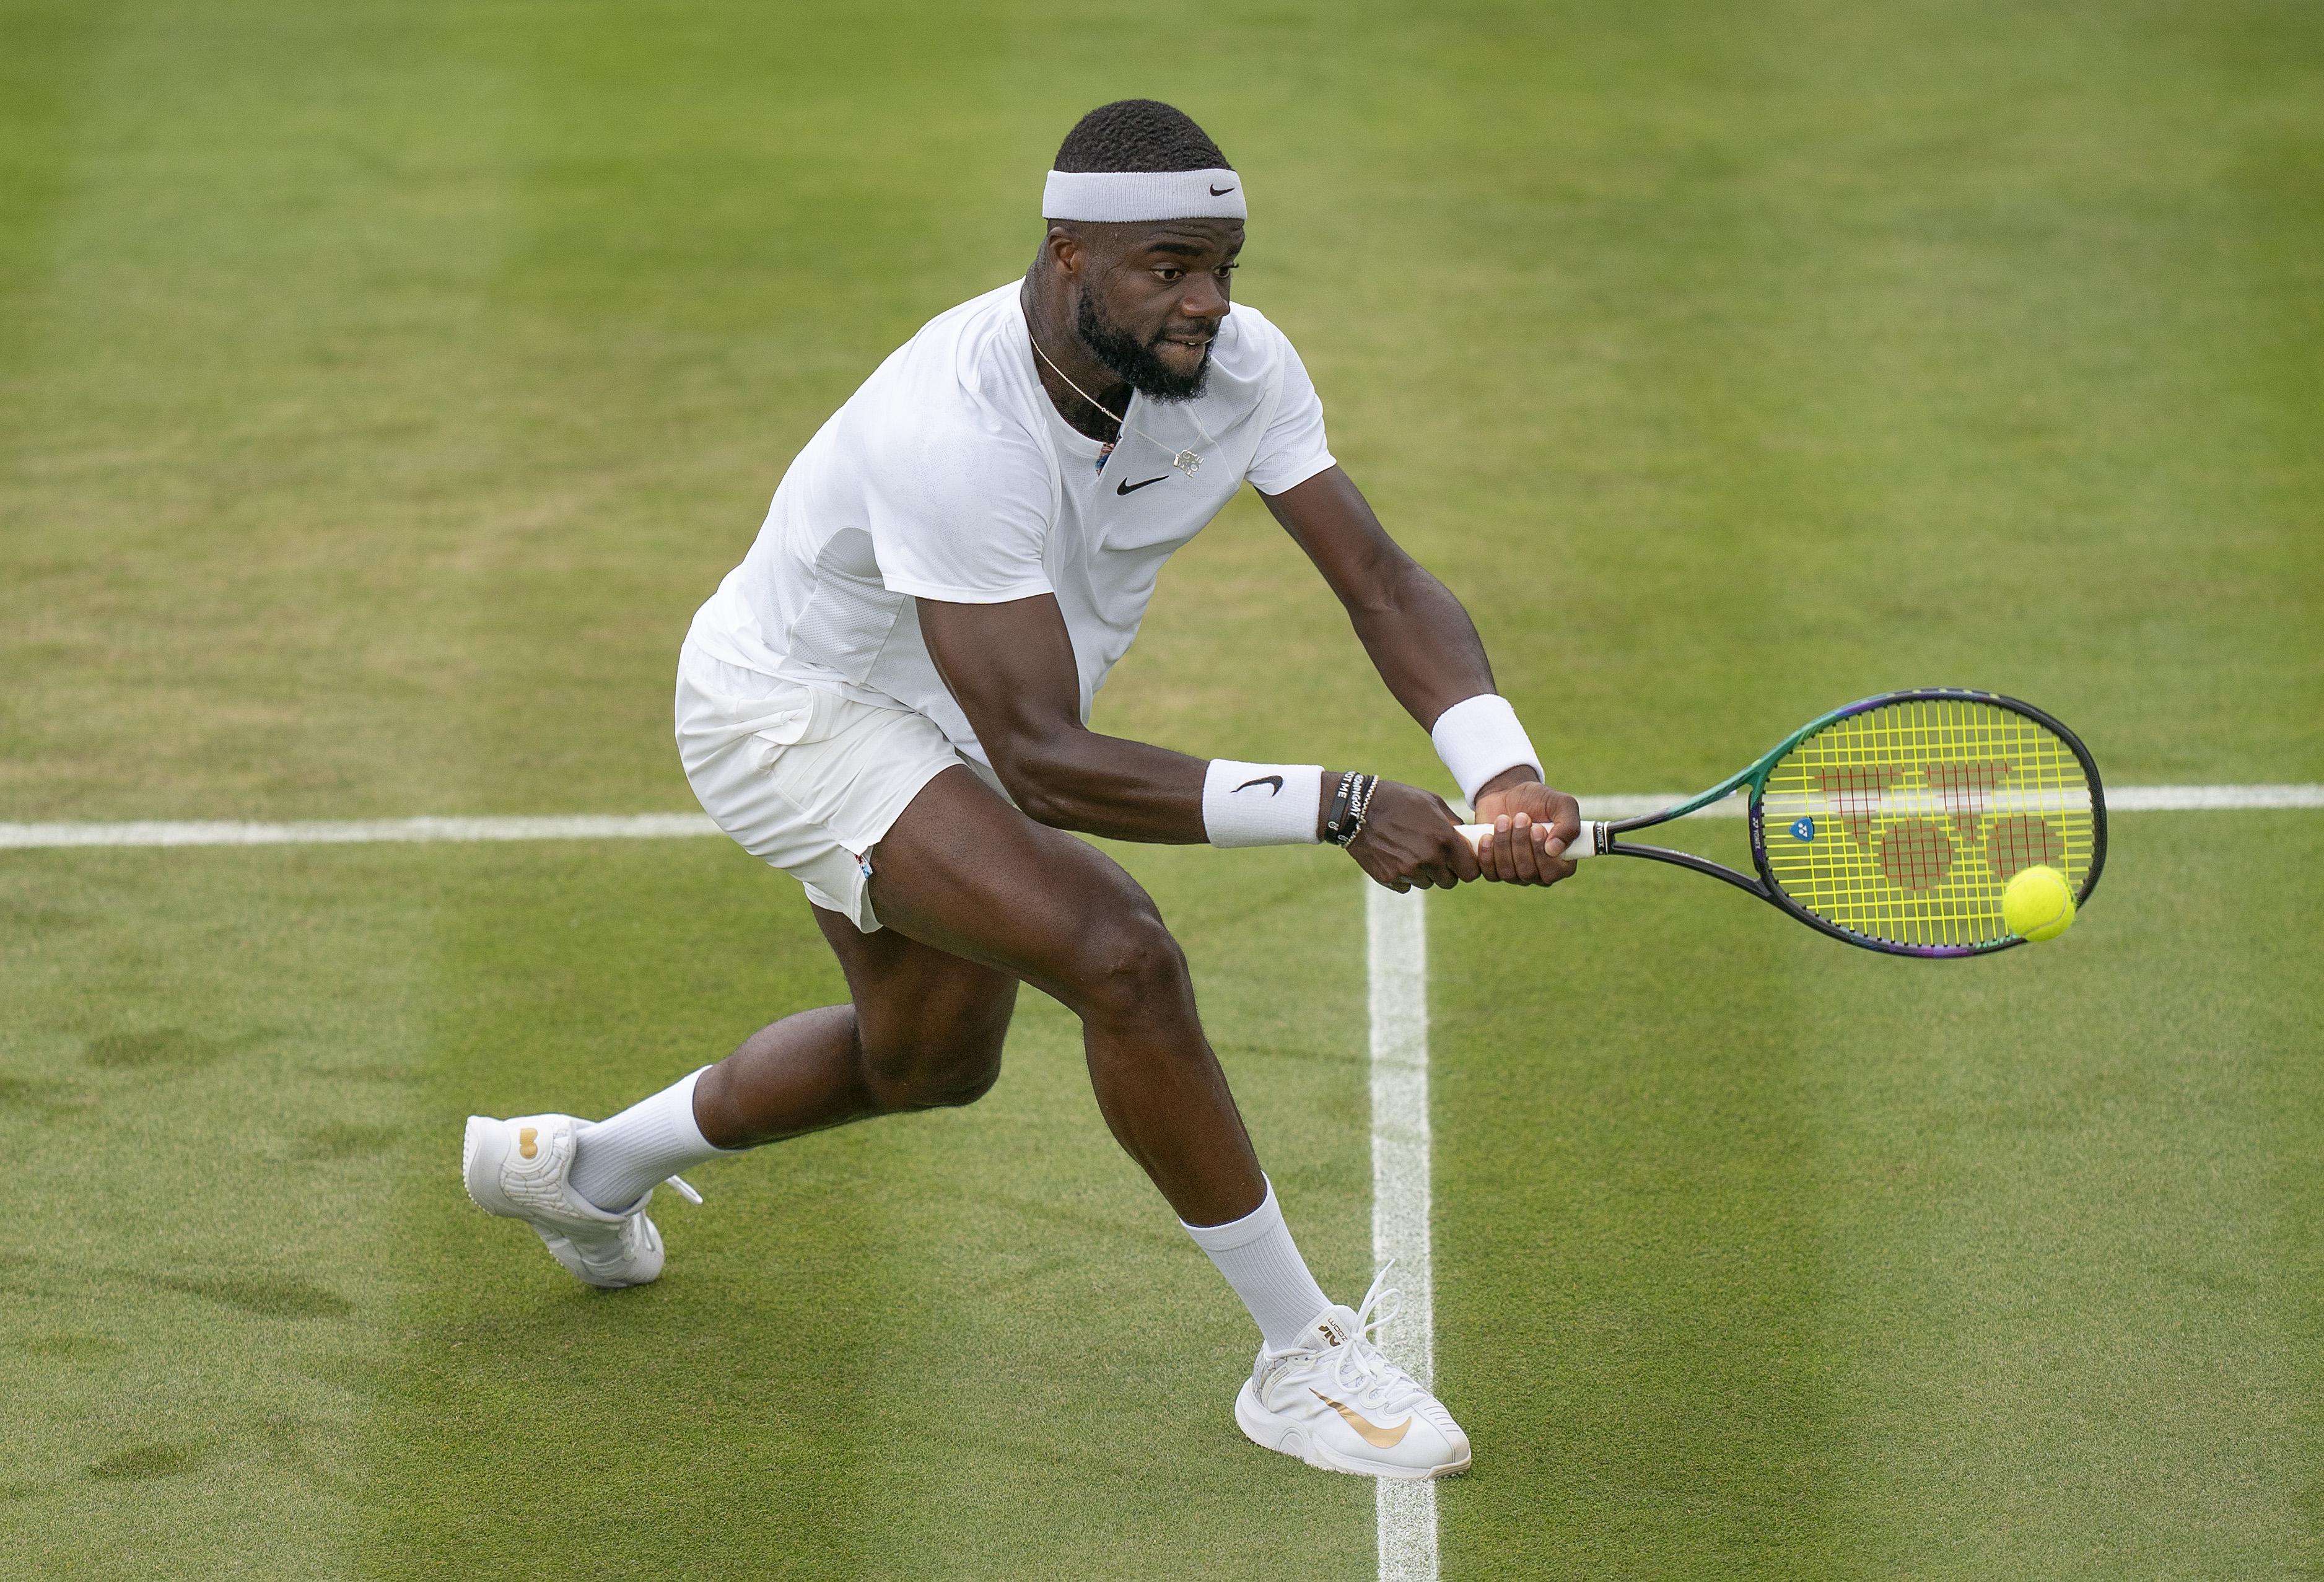 David Goffin vs Frances Tiafoe Odds, Prediction and Betting Trends for 2022 Wimbledon Men's Round of 16 Match